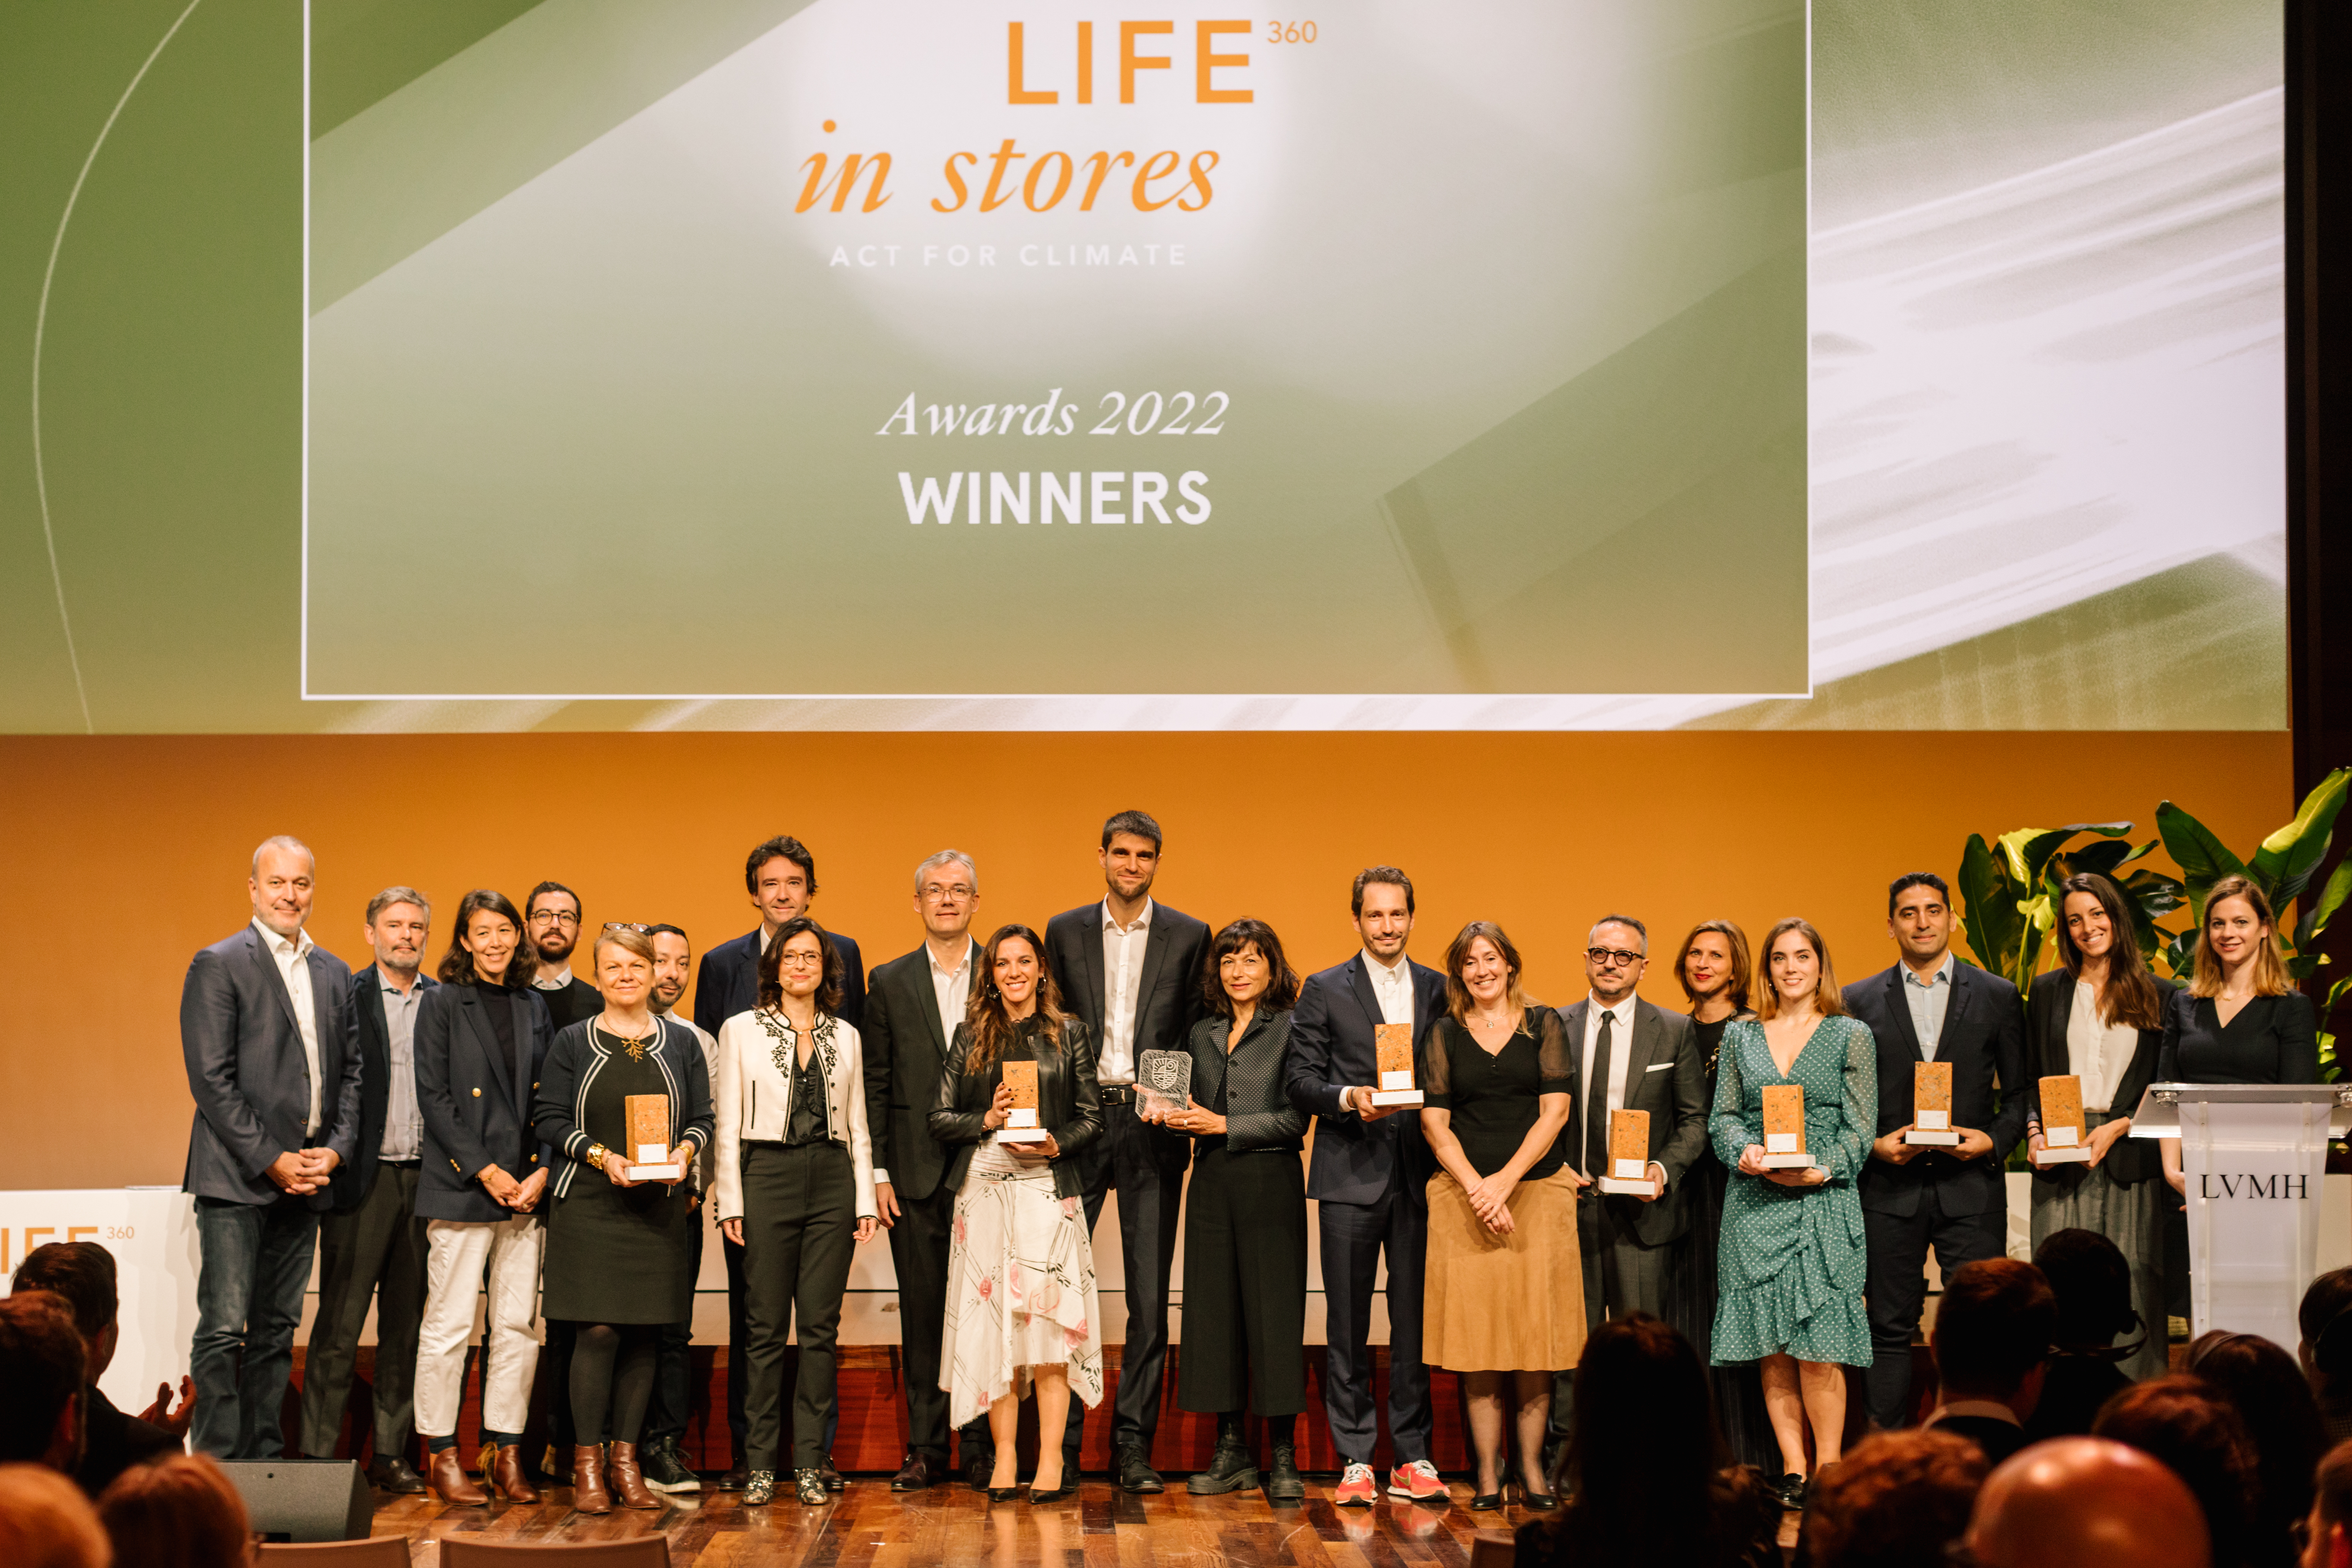 Awards 2022 winners Life360 in stores Acto for Climate